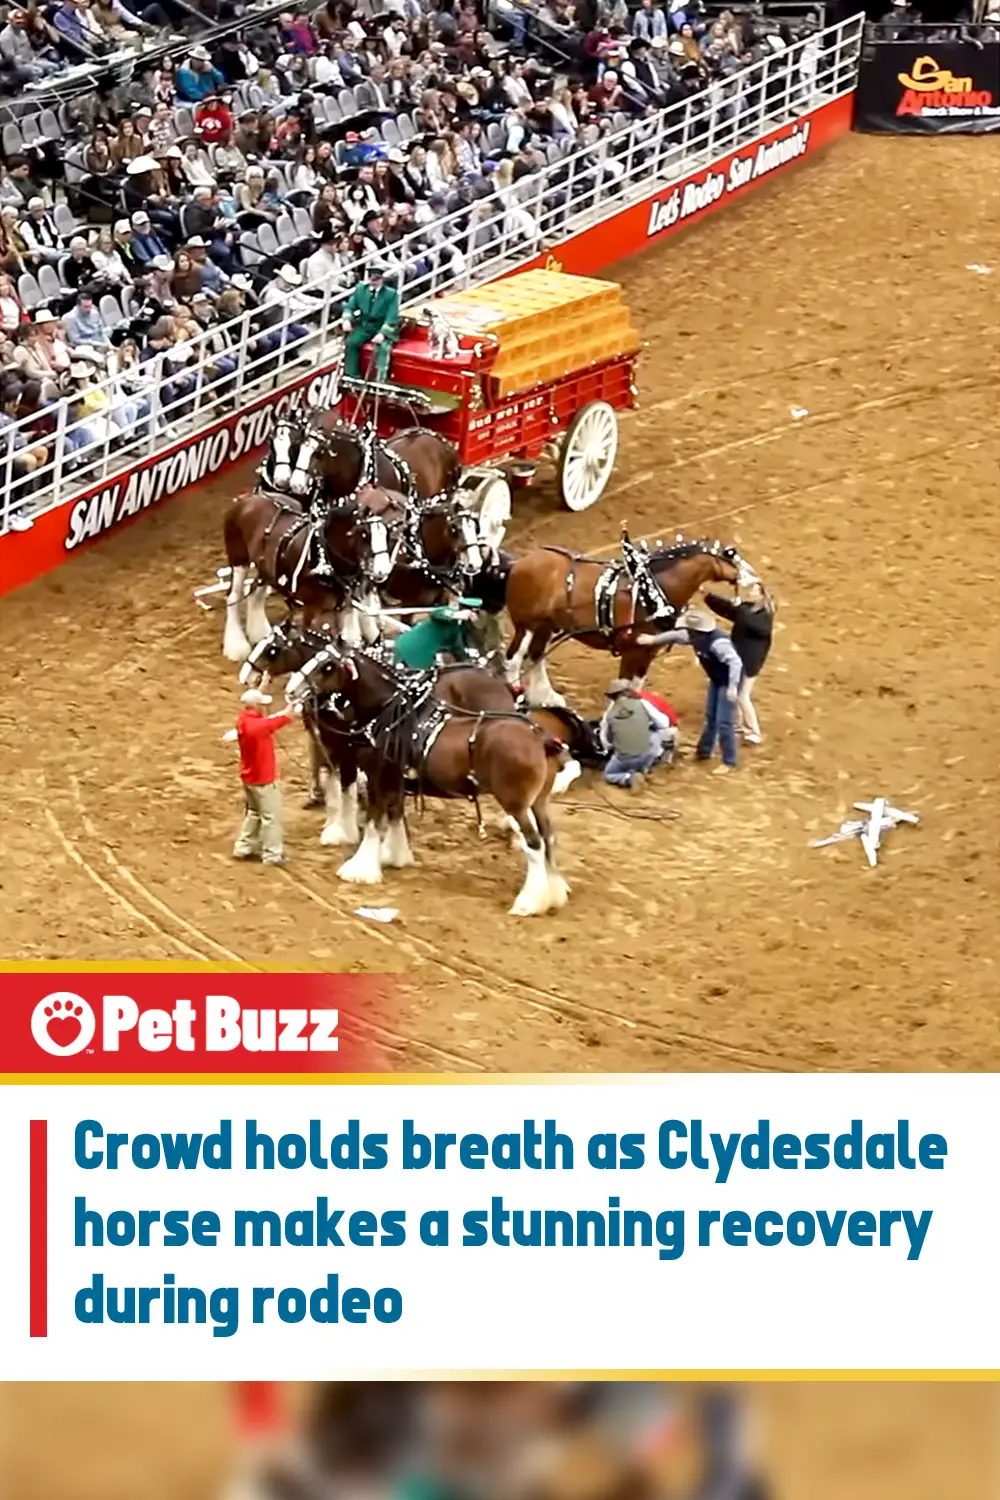 Crowd holds breath as Clydesdale horse makes a stunning recovery during rodeo